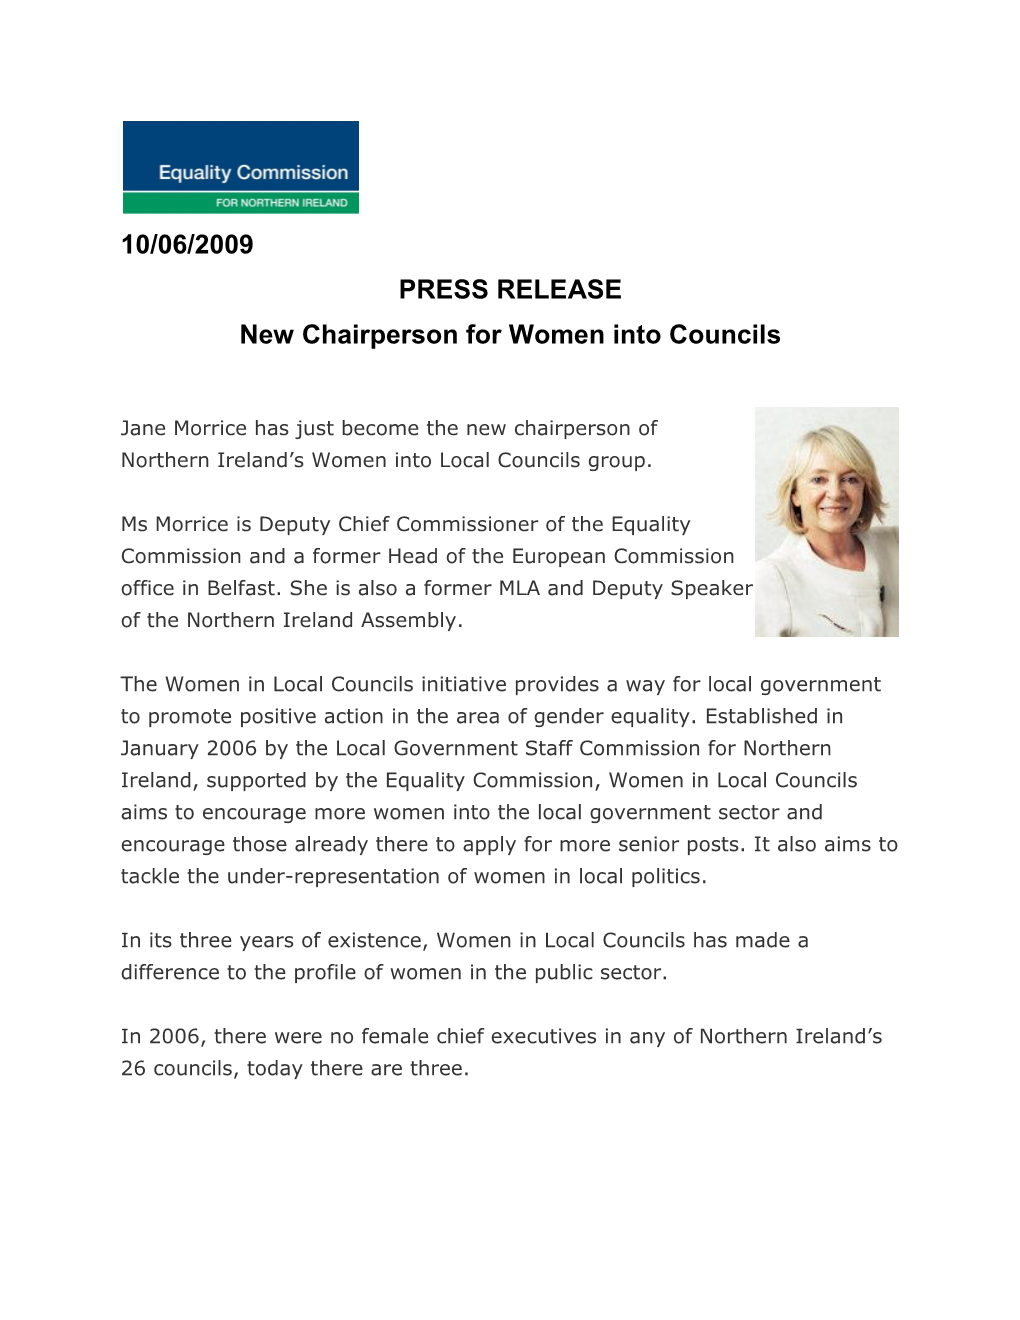 10/06/2009 PRESS RELEASE New Chairperson for Women Into Councils